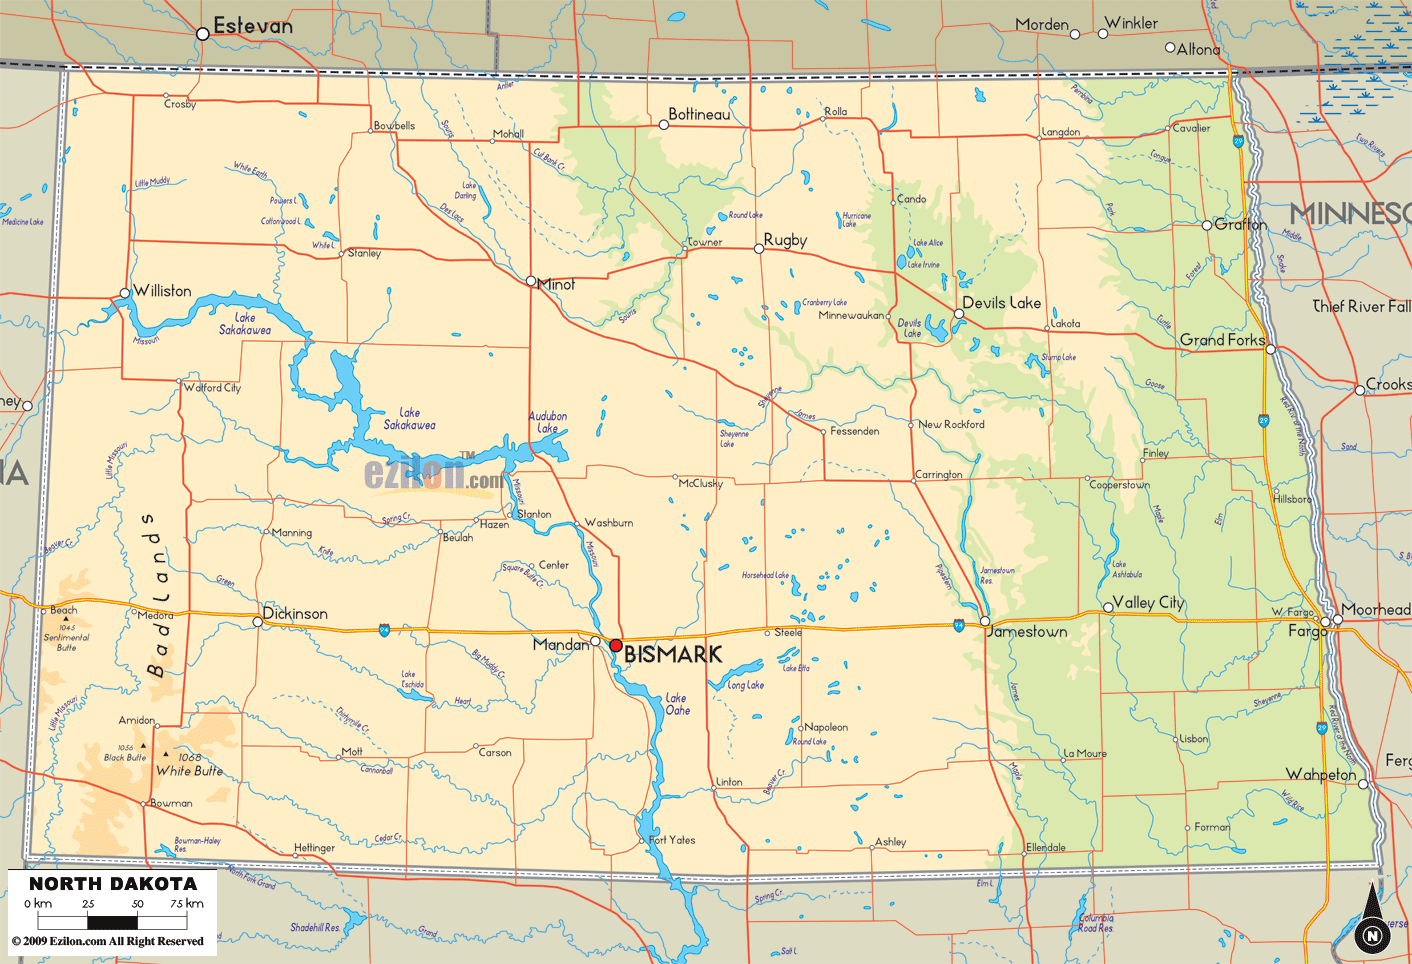 Physical map of North Dakota State, USA showing major geographical features such as rivers, lakes, mountains, topography and land formations.